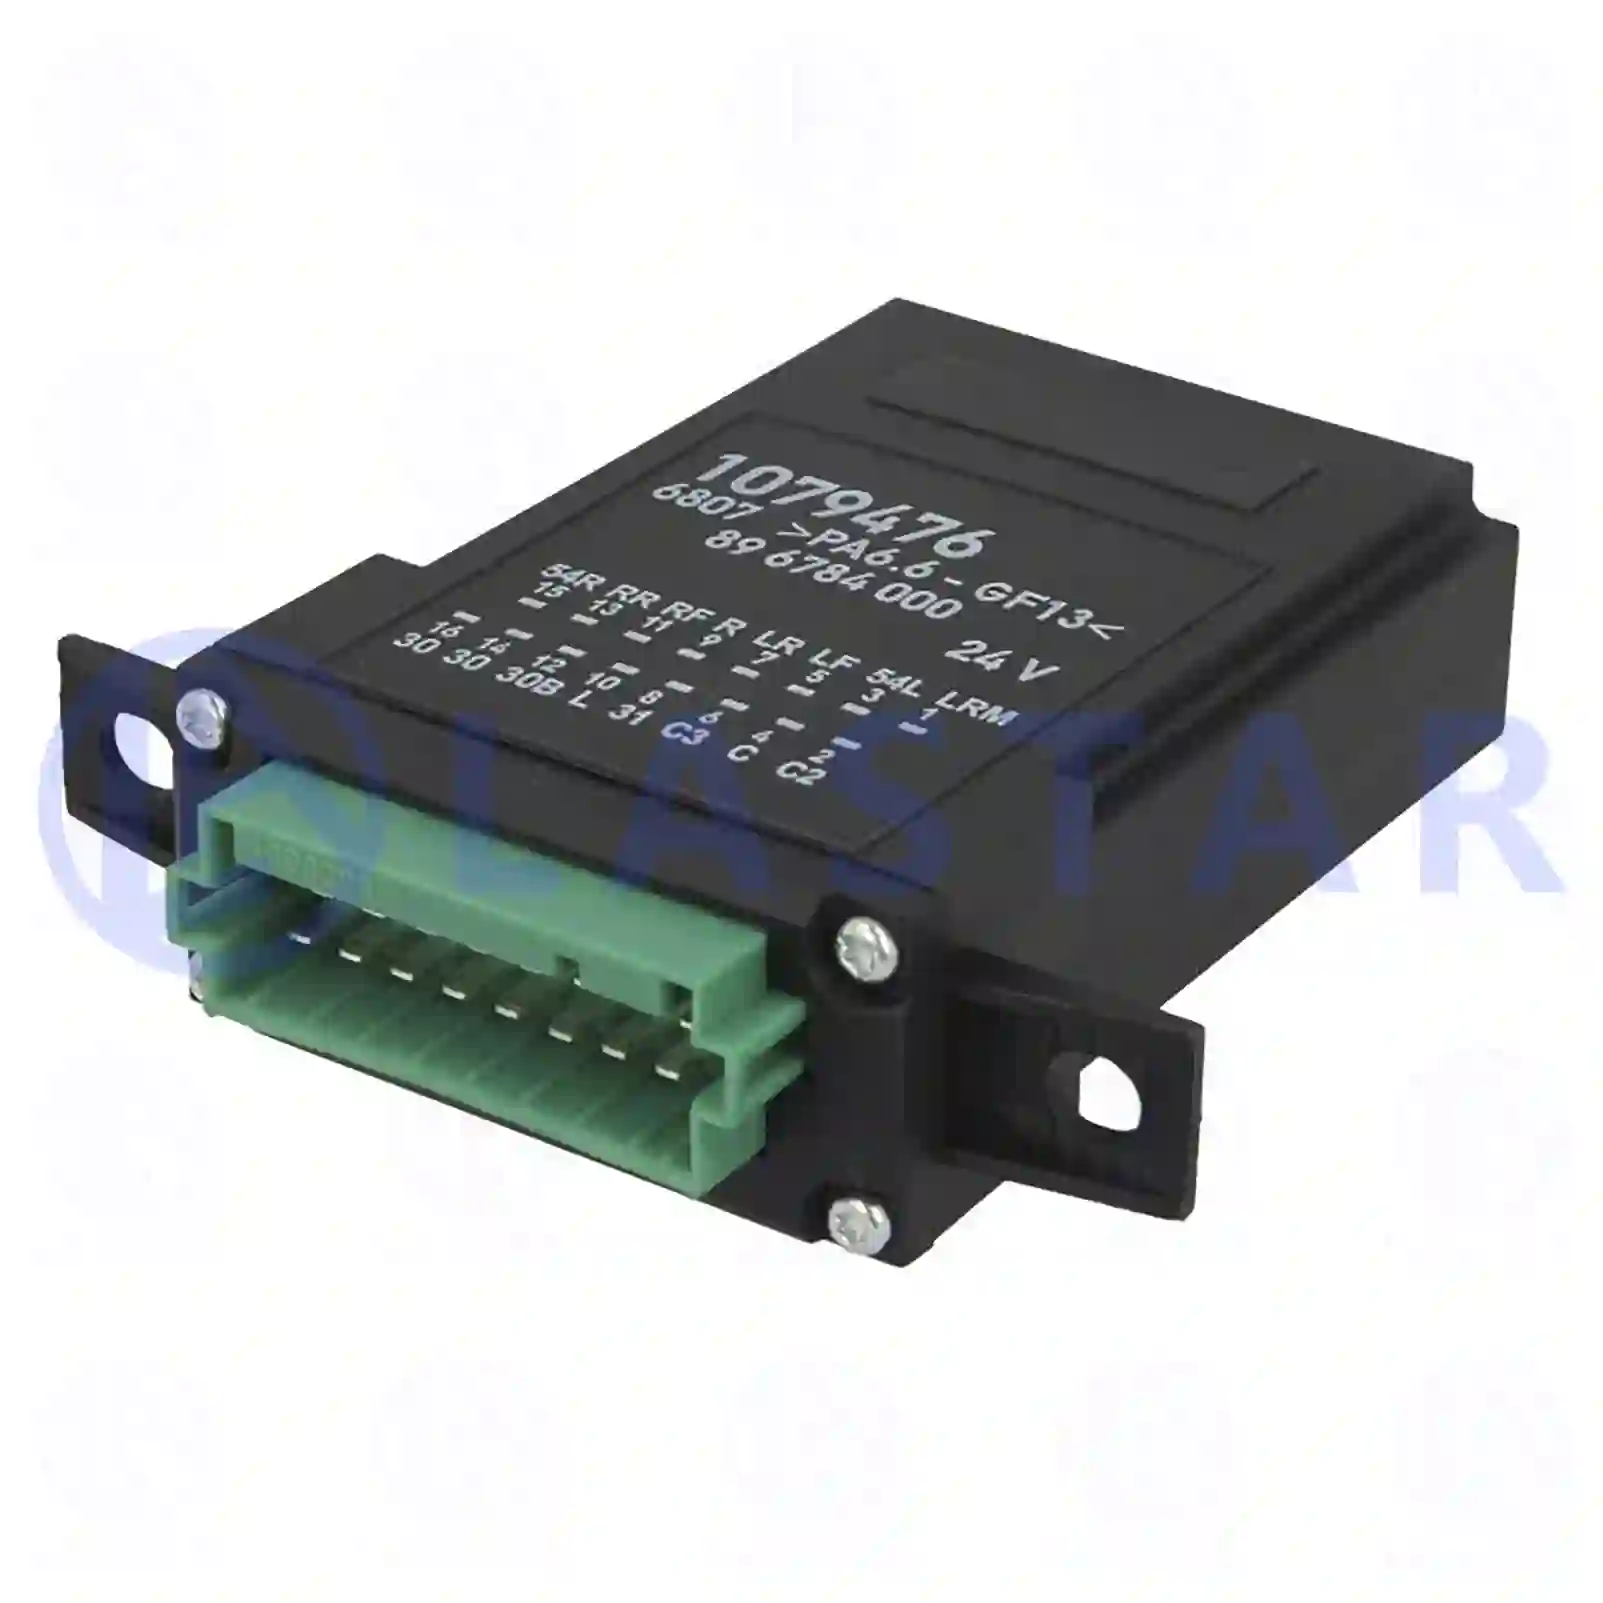 Turn signal relay, 77711183, 1079476, 3943863, 8155312, 8158697, ZG21262-0008 ||  77711183 Lastar Spare Part | Truck Spare Parts, Auotomotive Spare Parts Turn signal relay, 77711183, 1079476, 3943863, 8155312, 8158697, ZG21262-0008 ||  77711183 Lastar Spare Part | Truck Spare Parts, Auotomotive Spare Parts